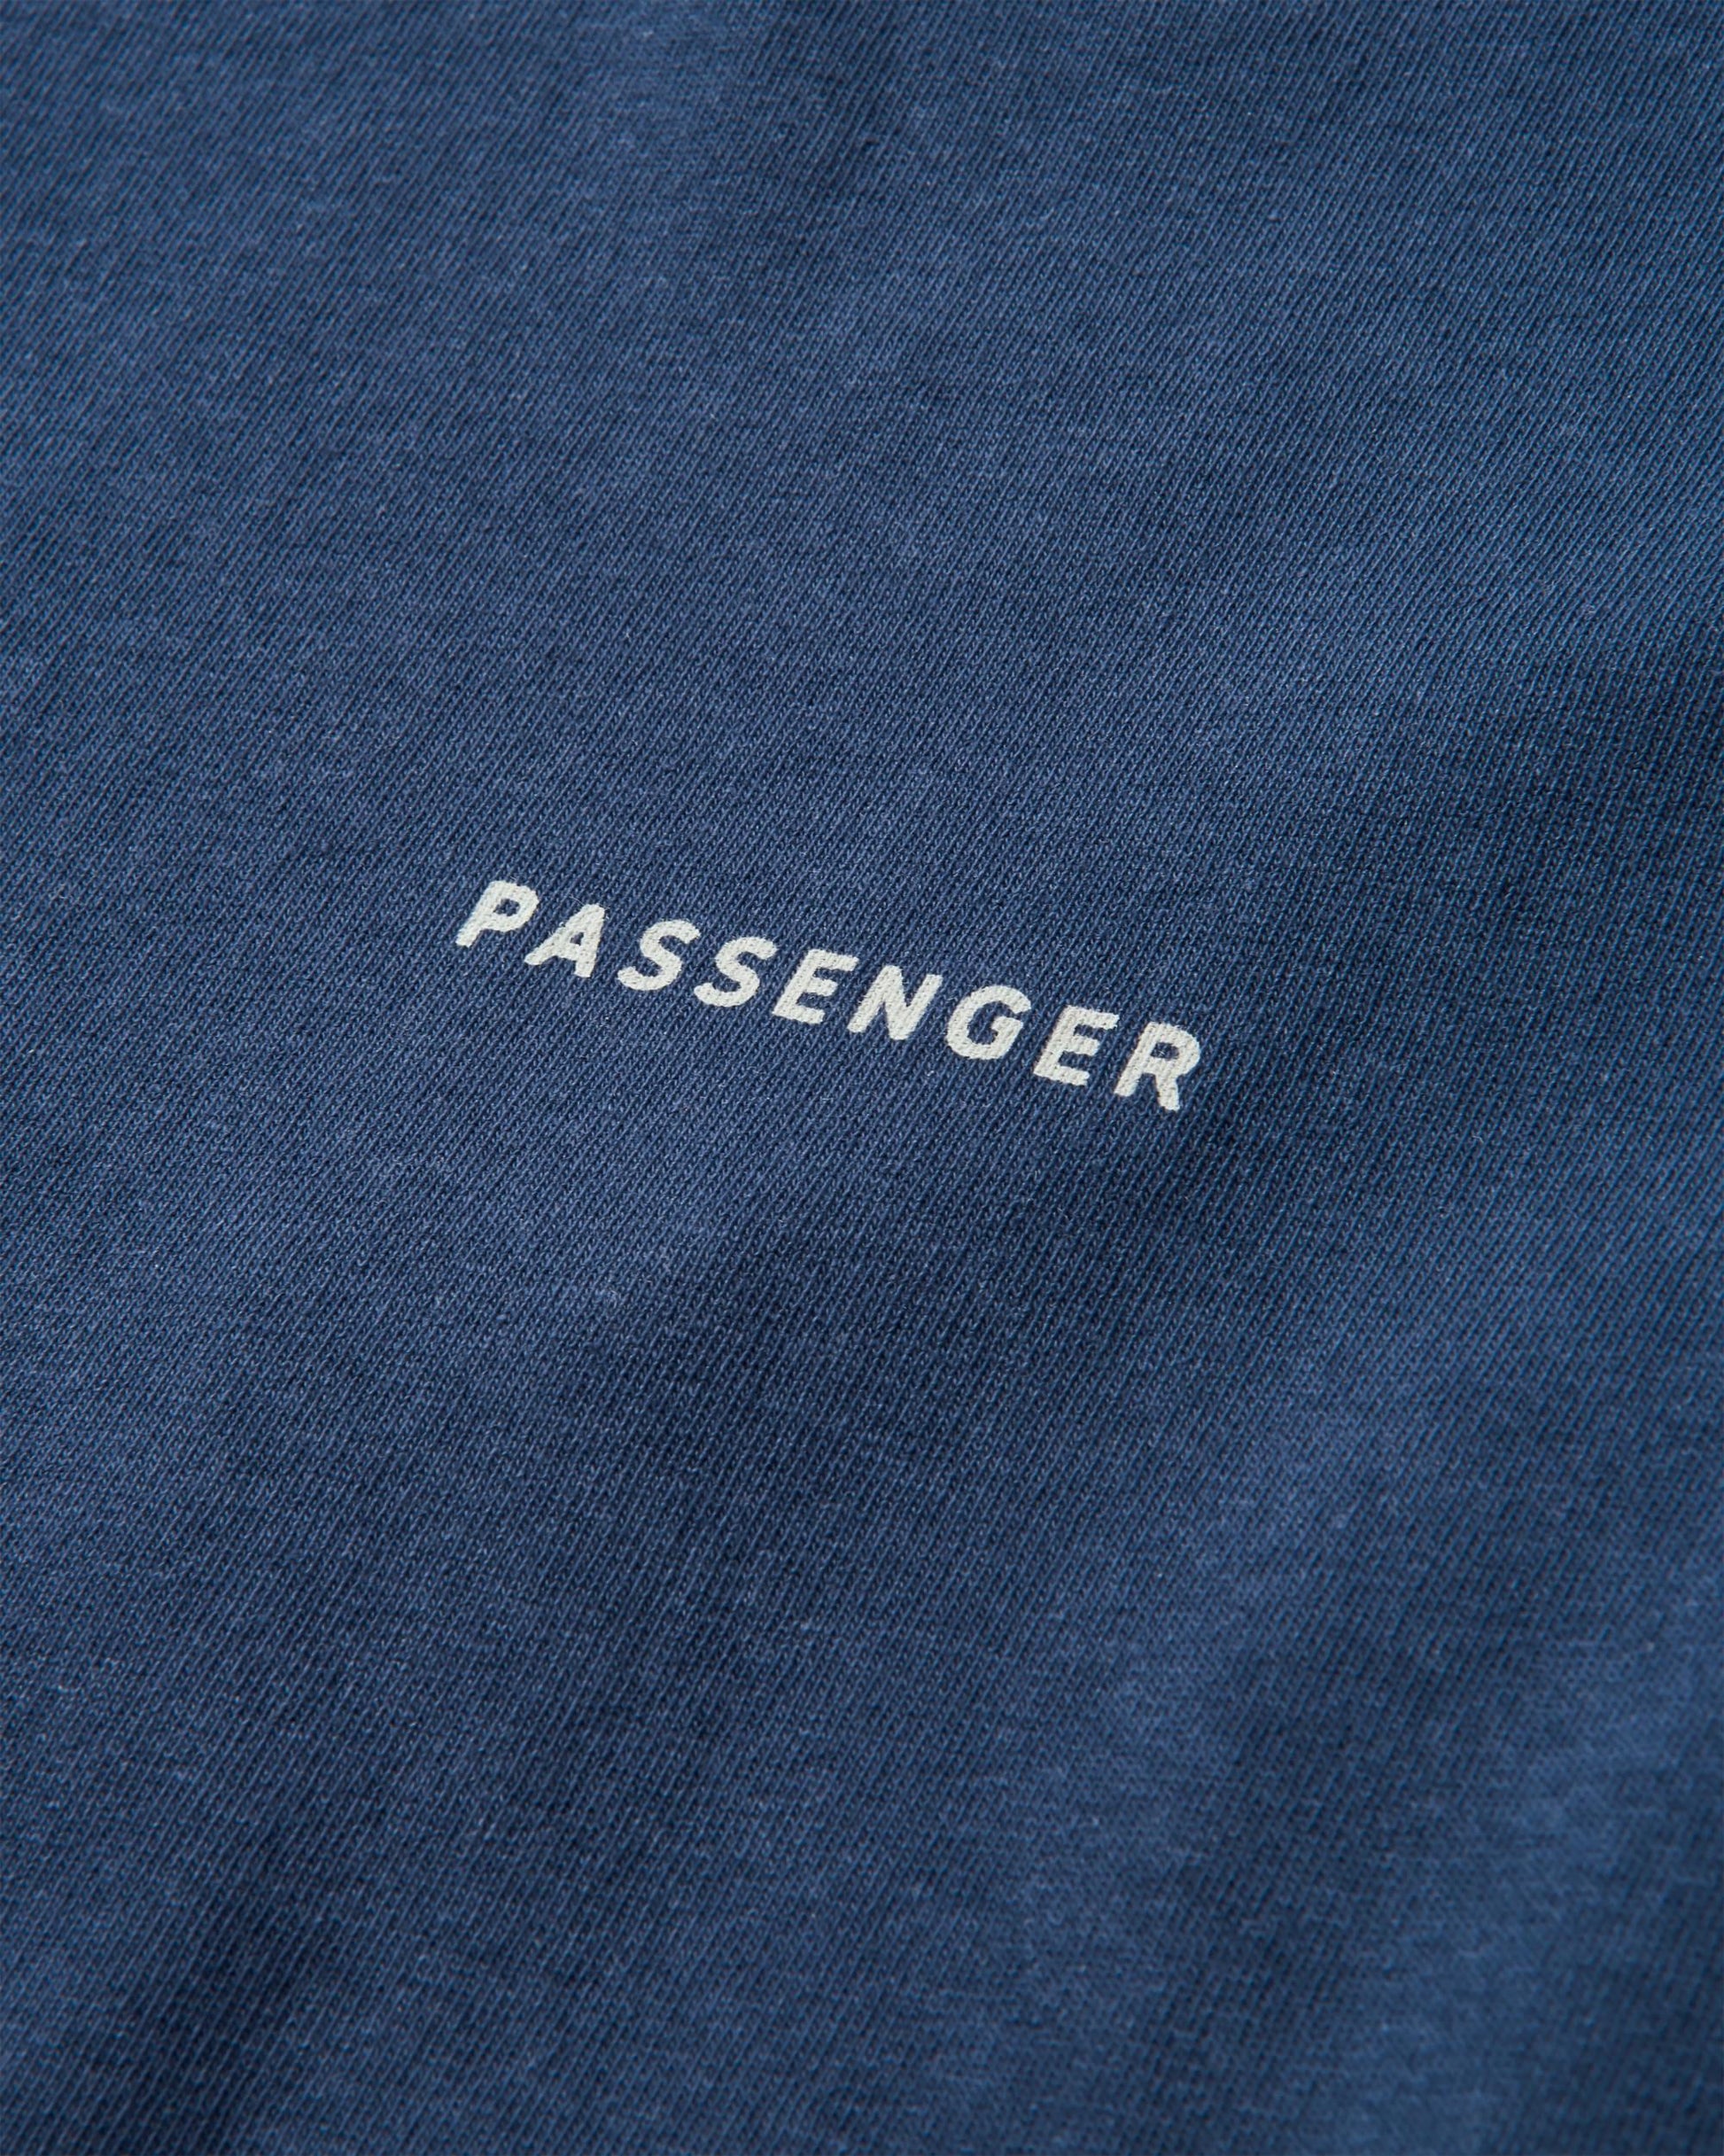 Made to Roam Recycled Cotton T-Shirt - Rich Navy